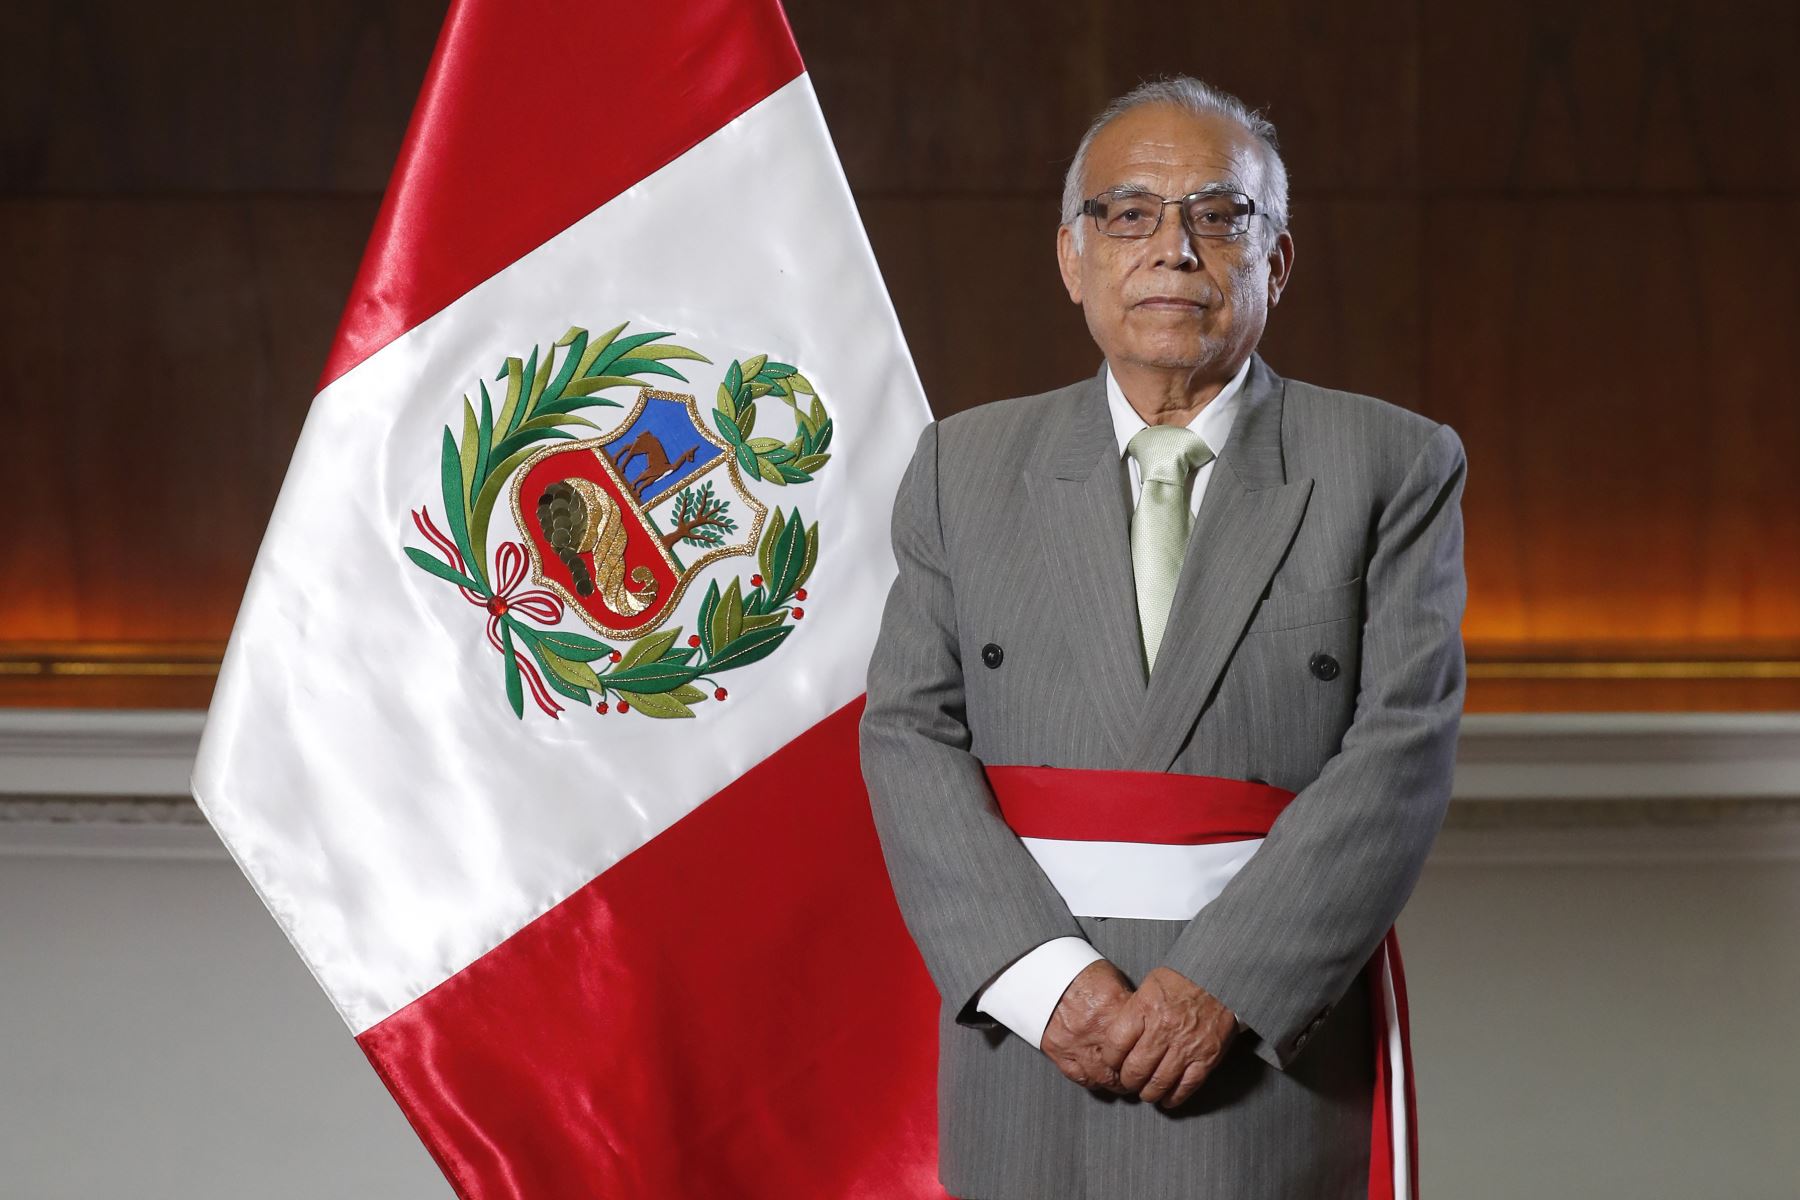 Peru's Prime Minister, Anibal Torres, informed on Wednesday via Twitter that he presented his resignation to President Pedro Castillo, alleging "personal reasons".